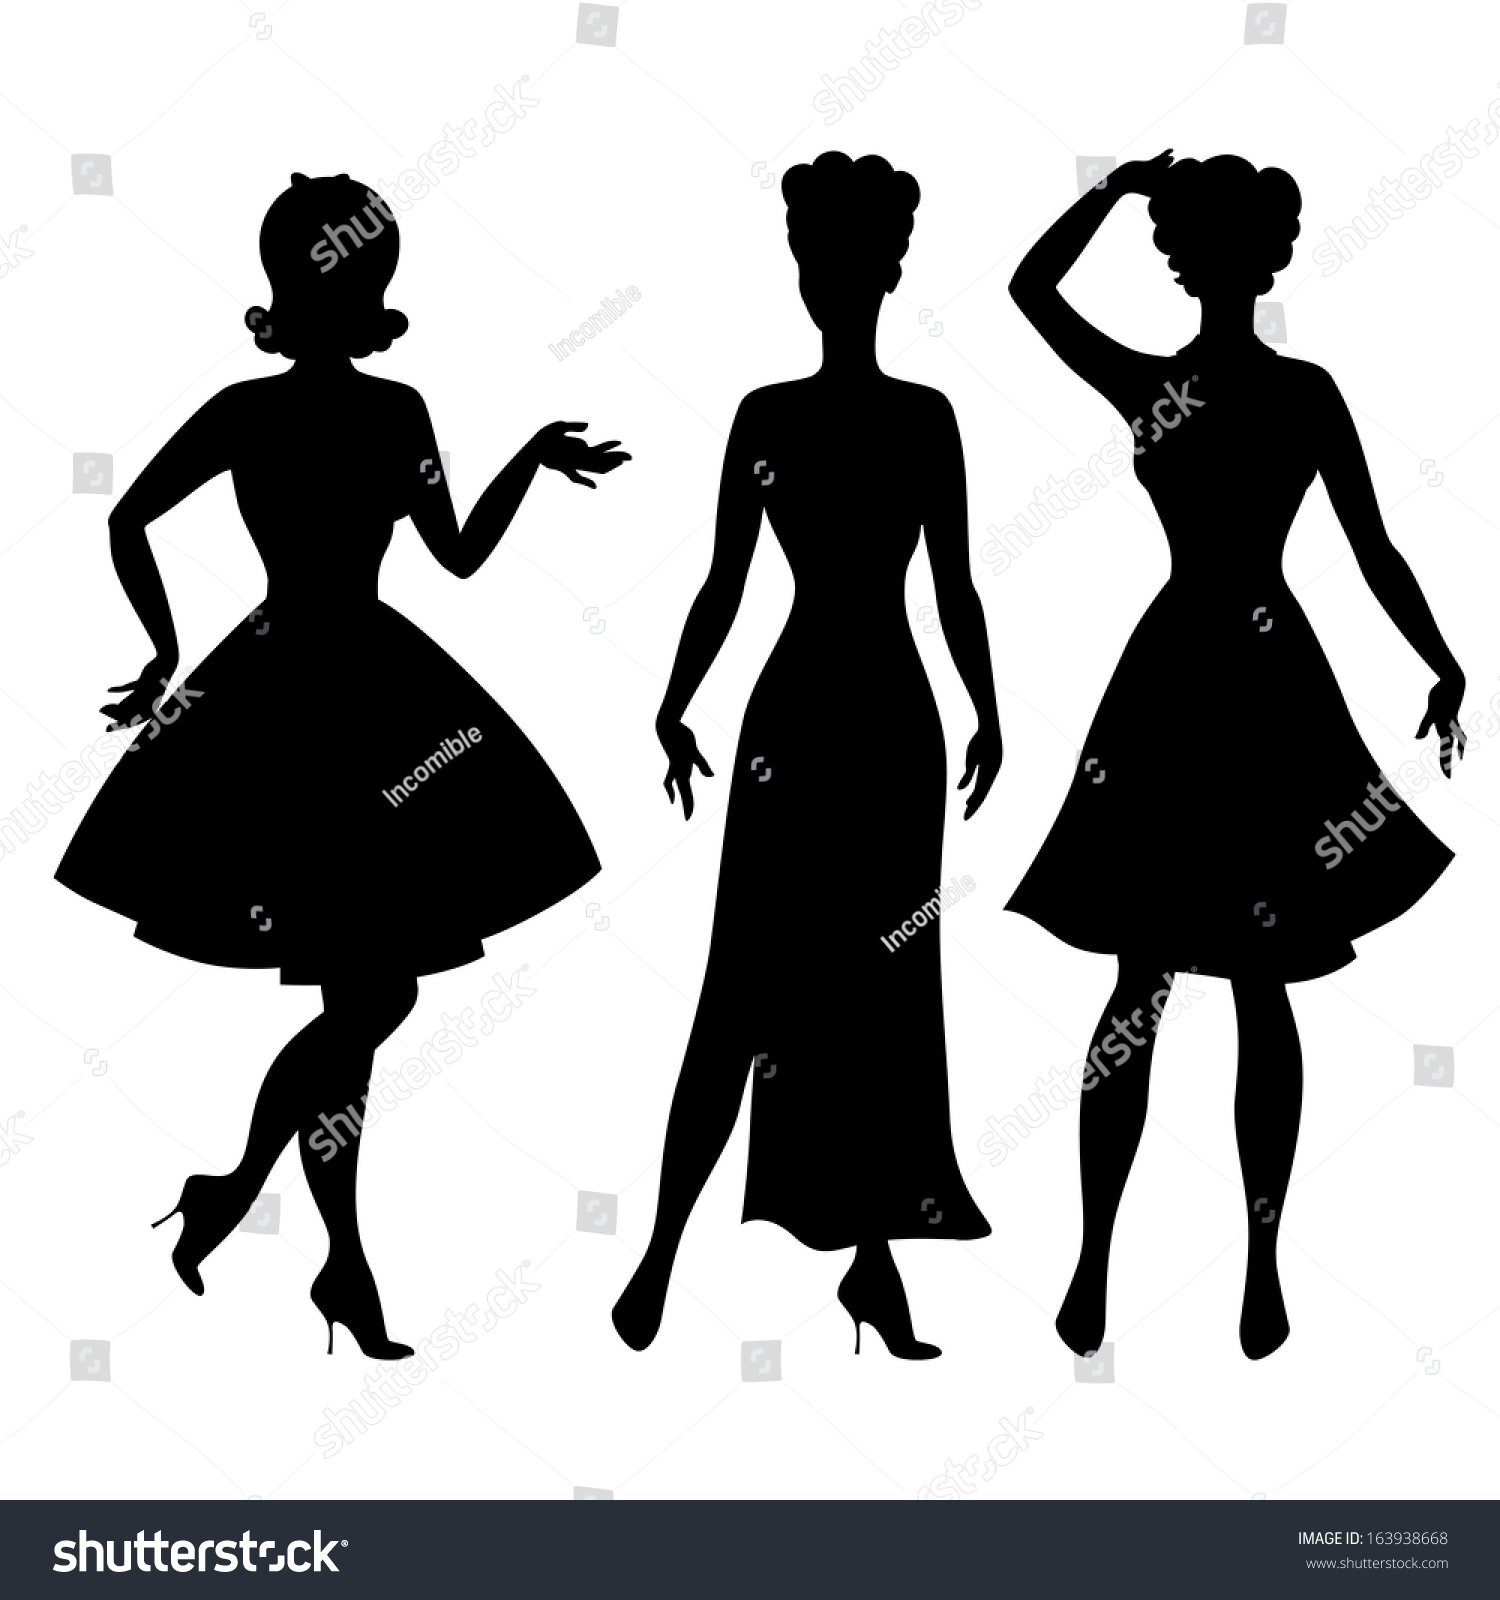 SVG of Silhouettes of beautiful pin up girls 1950s style. svg